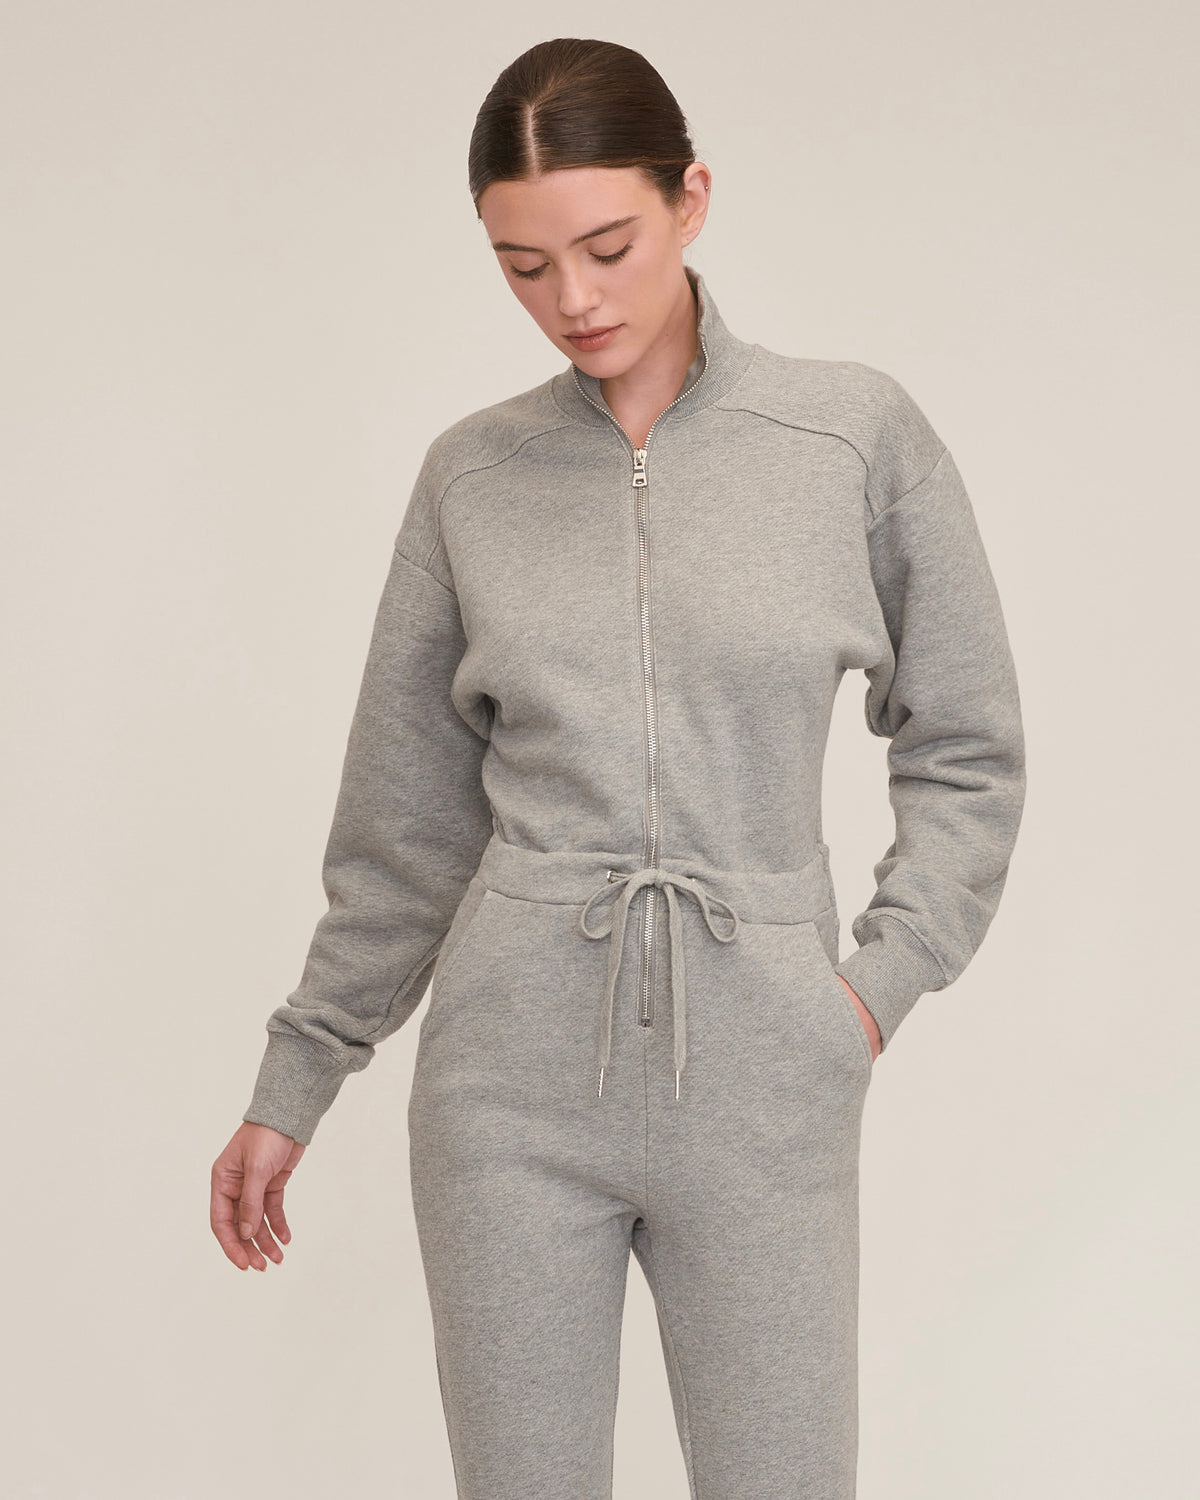 Red-Eye French Terry Zip Front Jumpsuit in Heather Grey | MARISSA WEBB